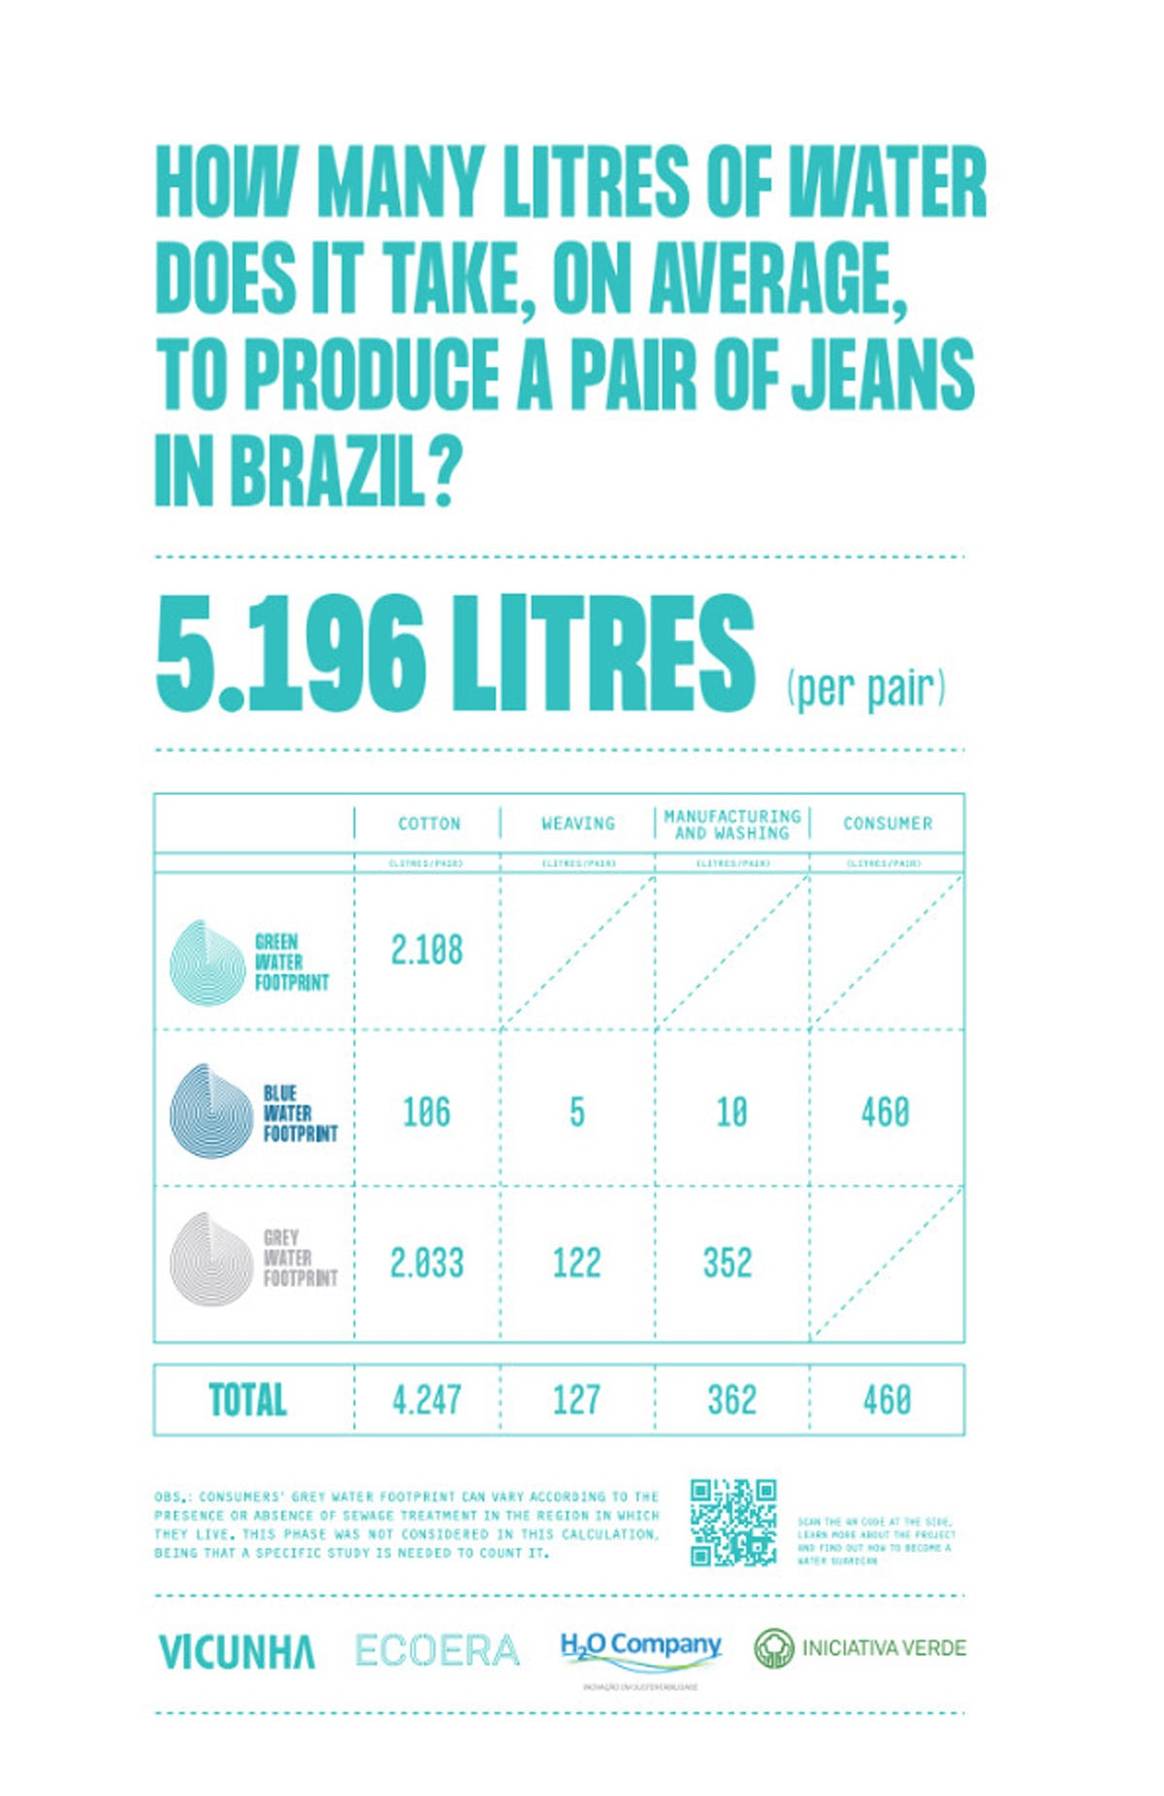 Vicunha introduces project for reducing water consumption in jeans production